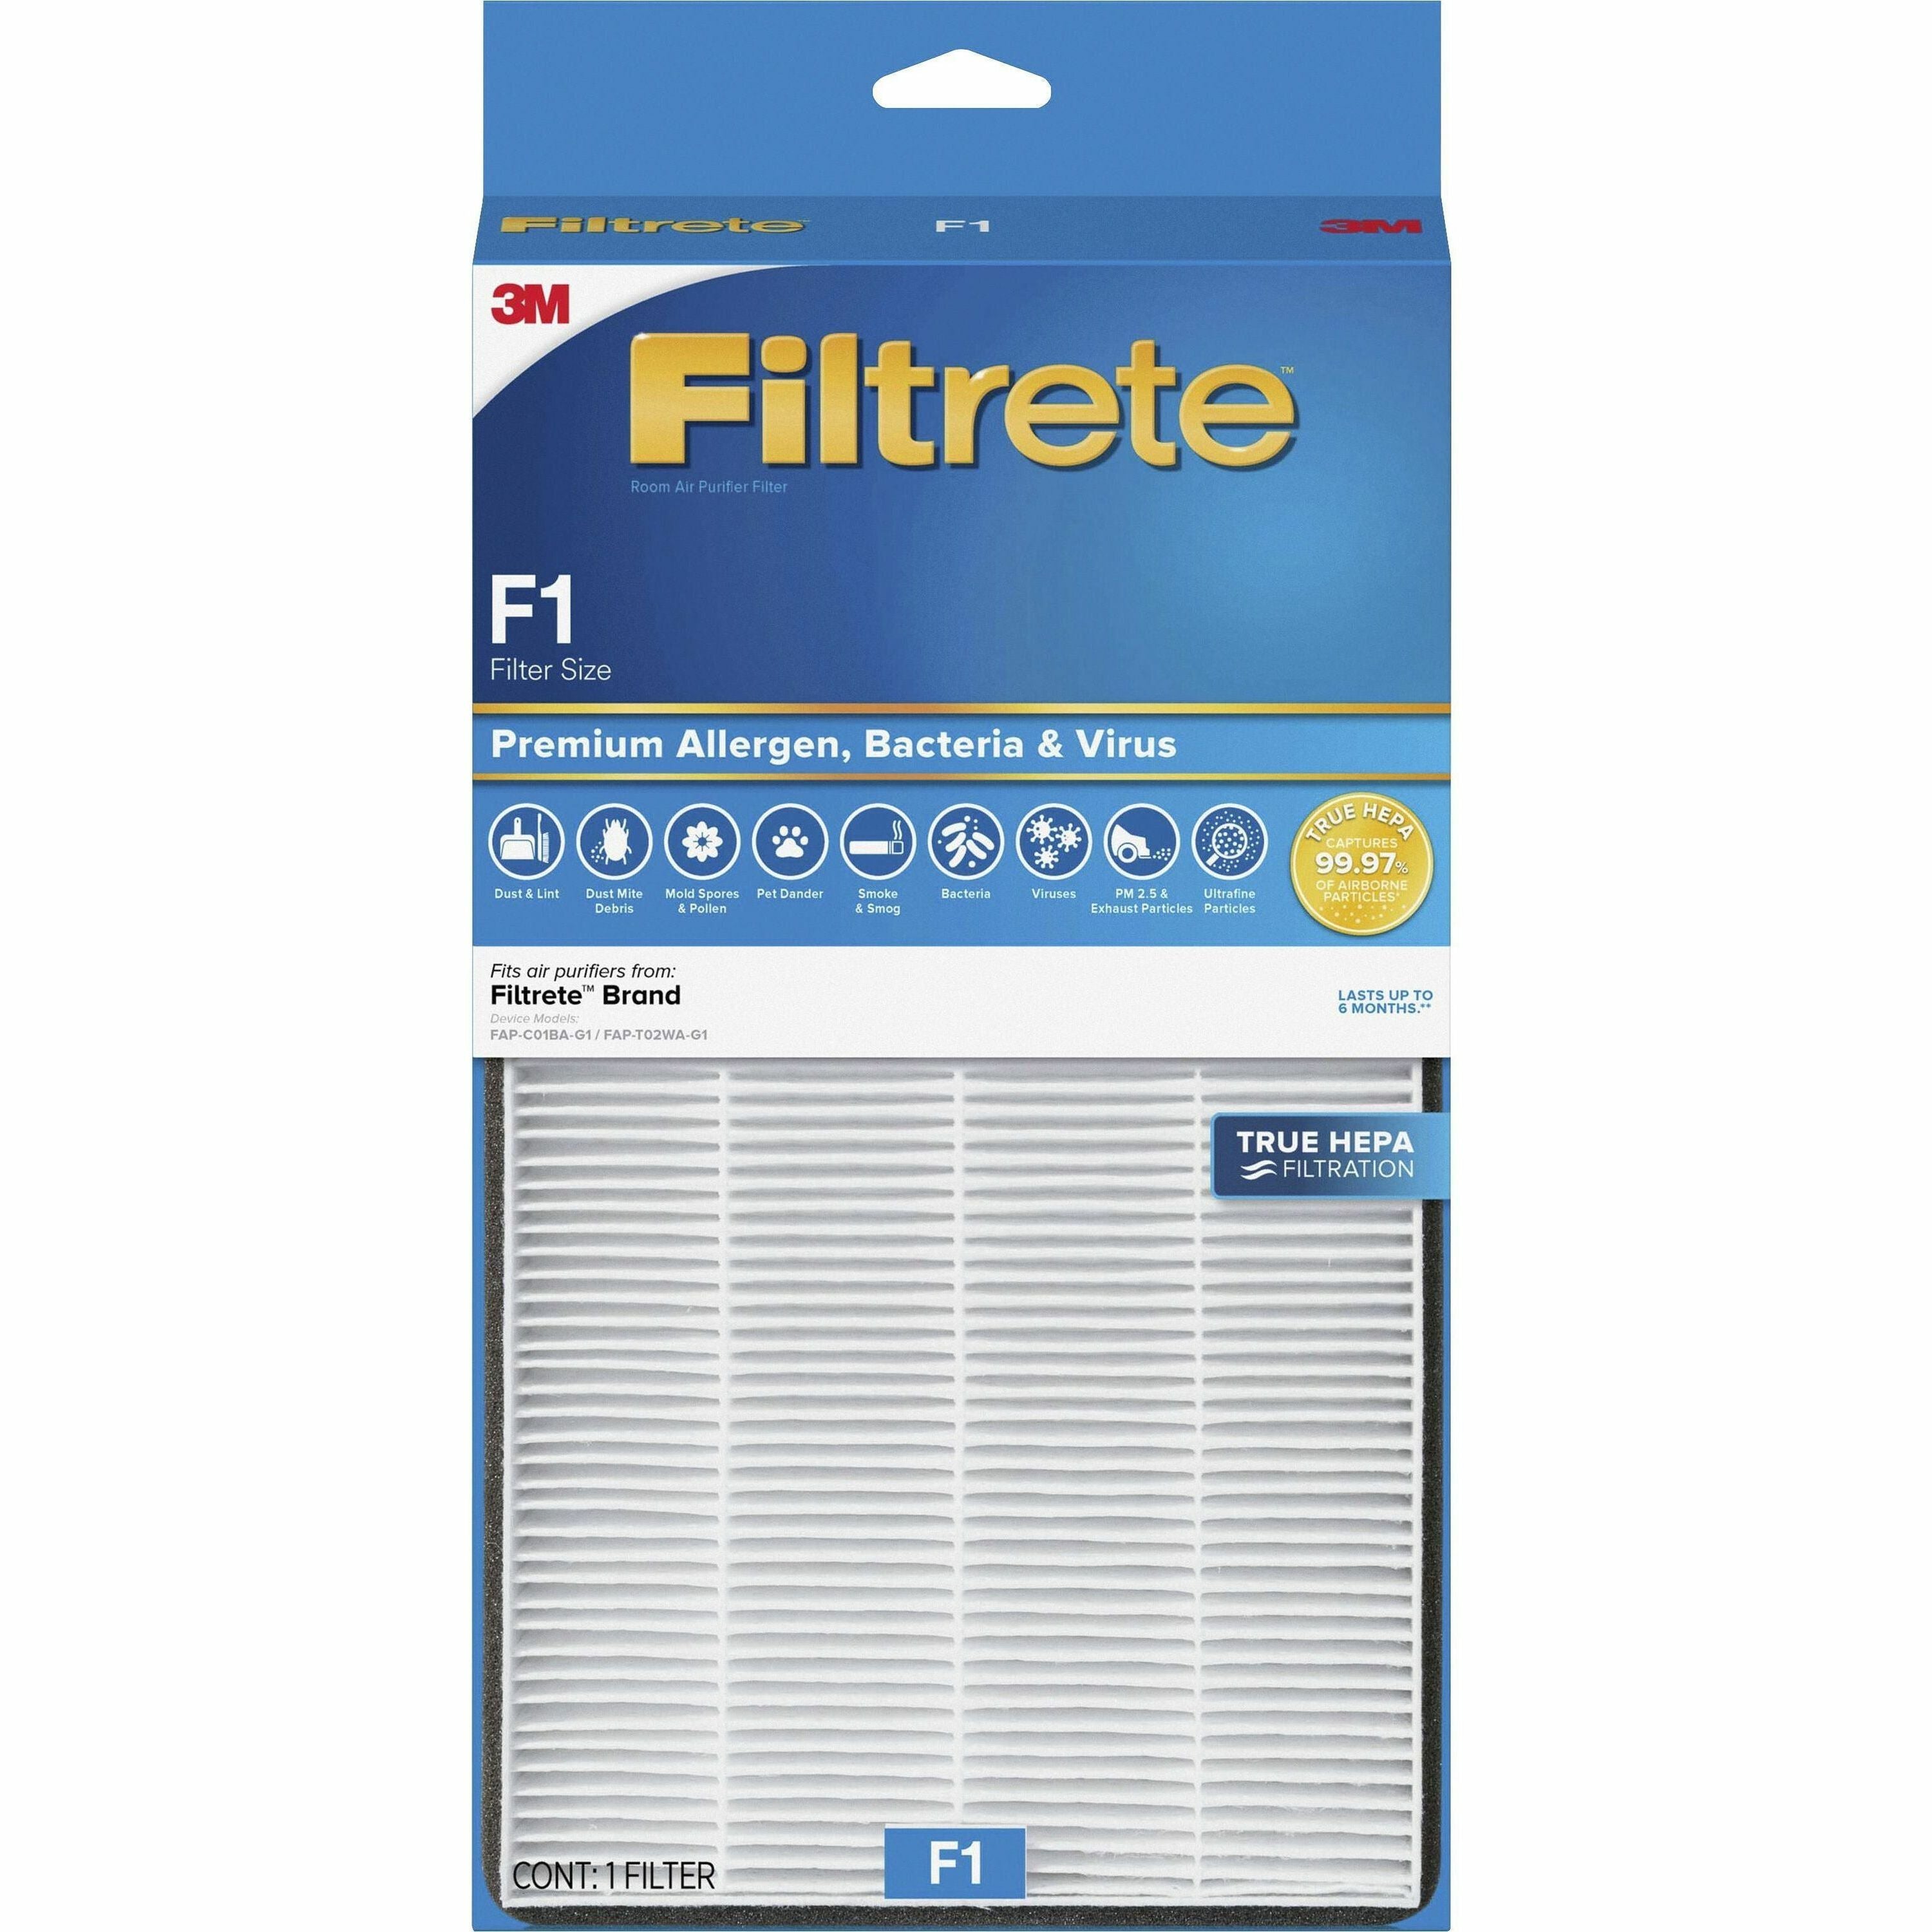 filtrete-air-filter-hepa-for-air-purifier-remove-allergens-remove-bacteria-remove-virus-particlesf2-filter-grade-82-height-x-13-width-polypropylene_mmmfapff2n4 - 1